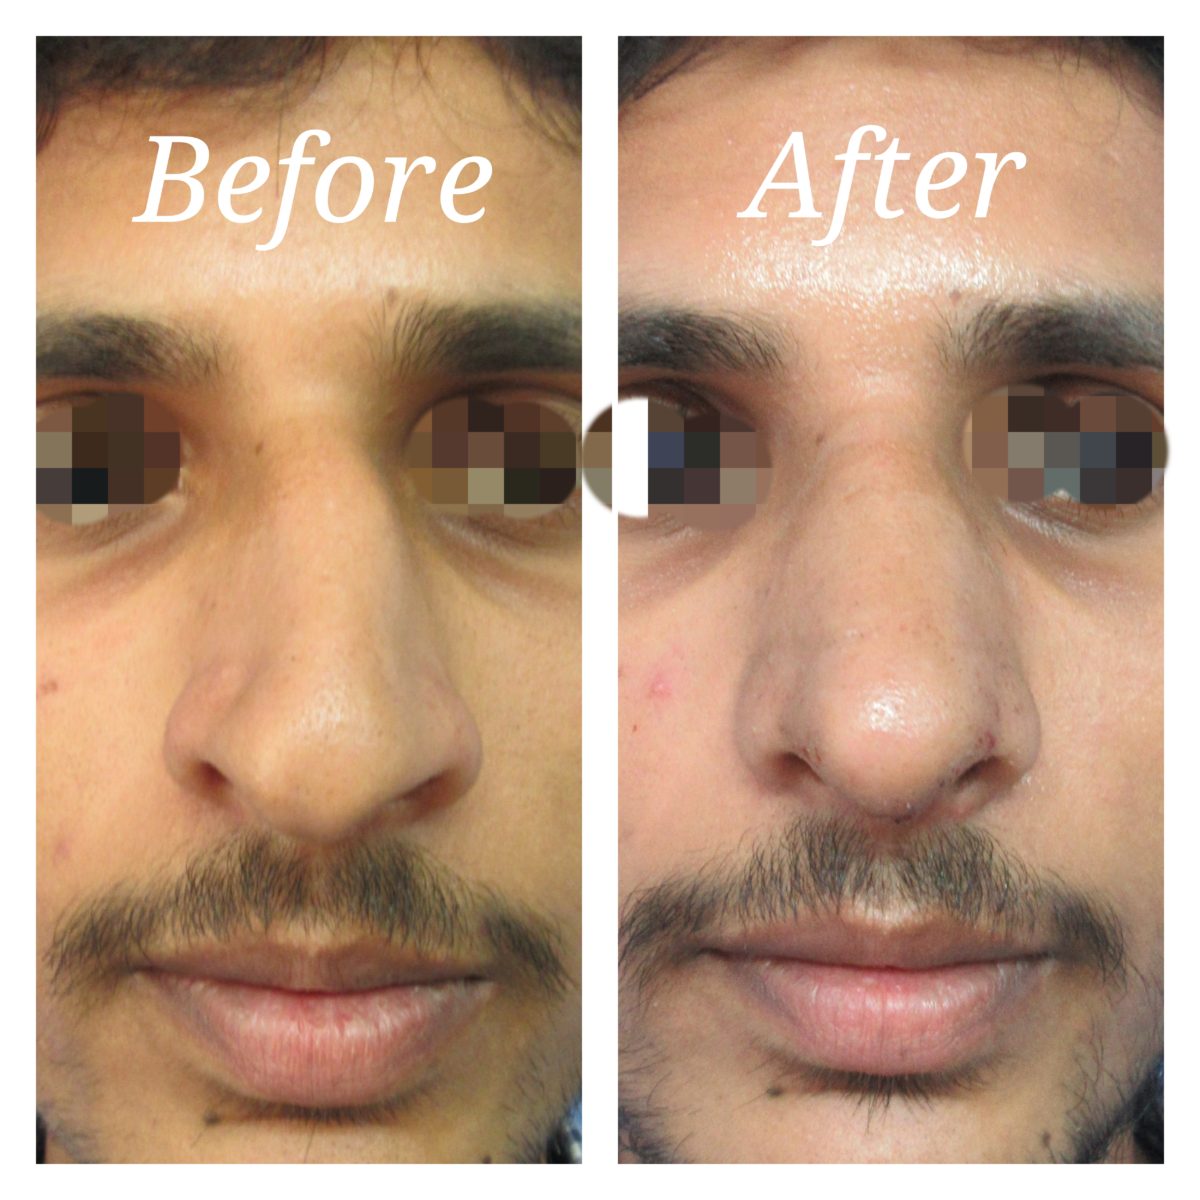 Nose Surgery Cost, Bangalore. Leading Nose Reshaping Rhinoplasty Surgeon In India